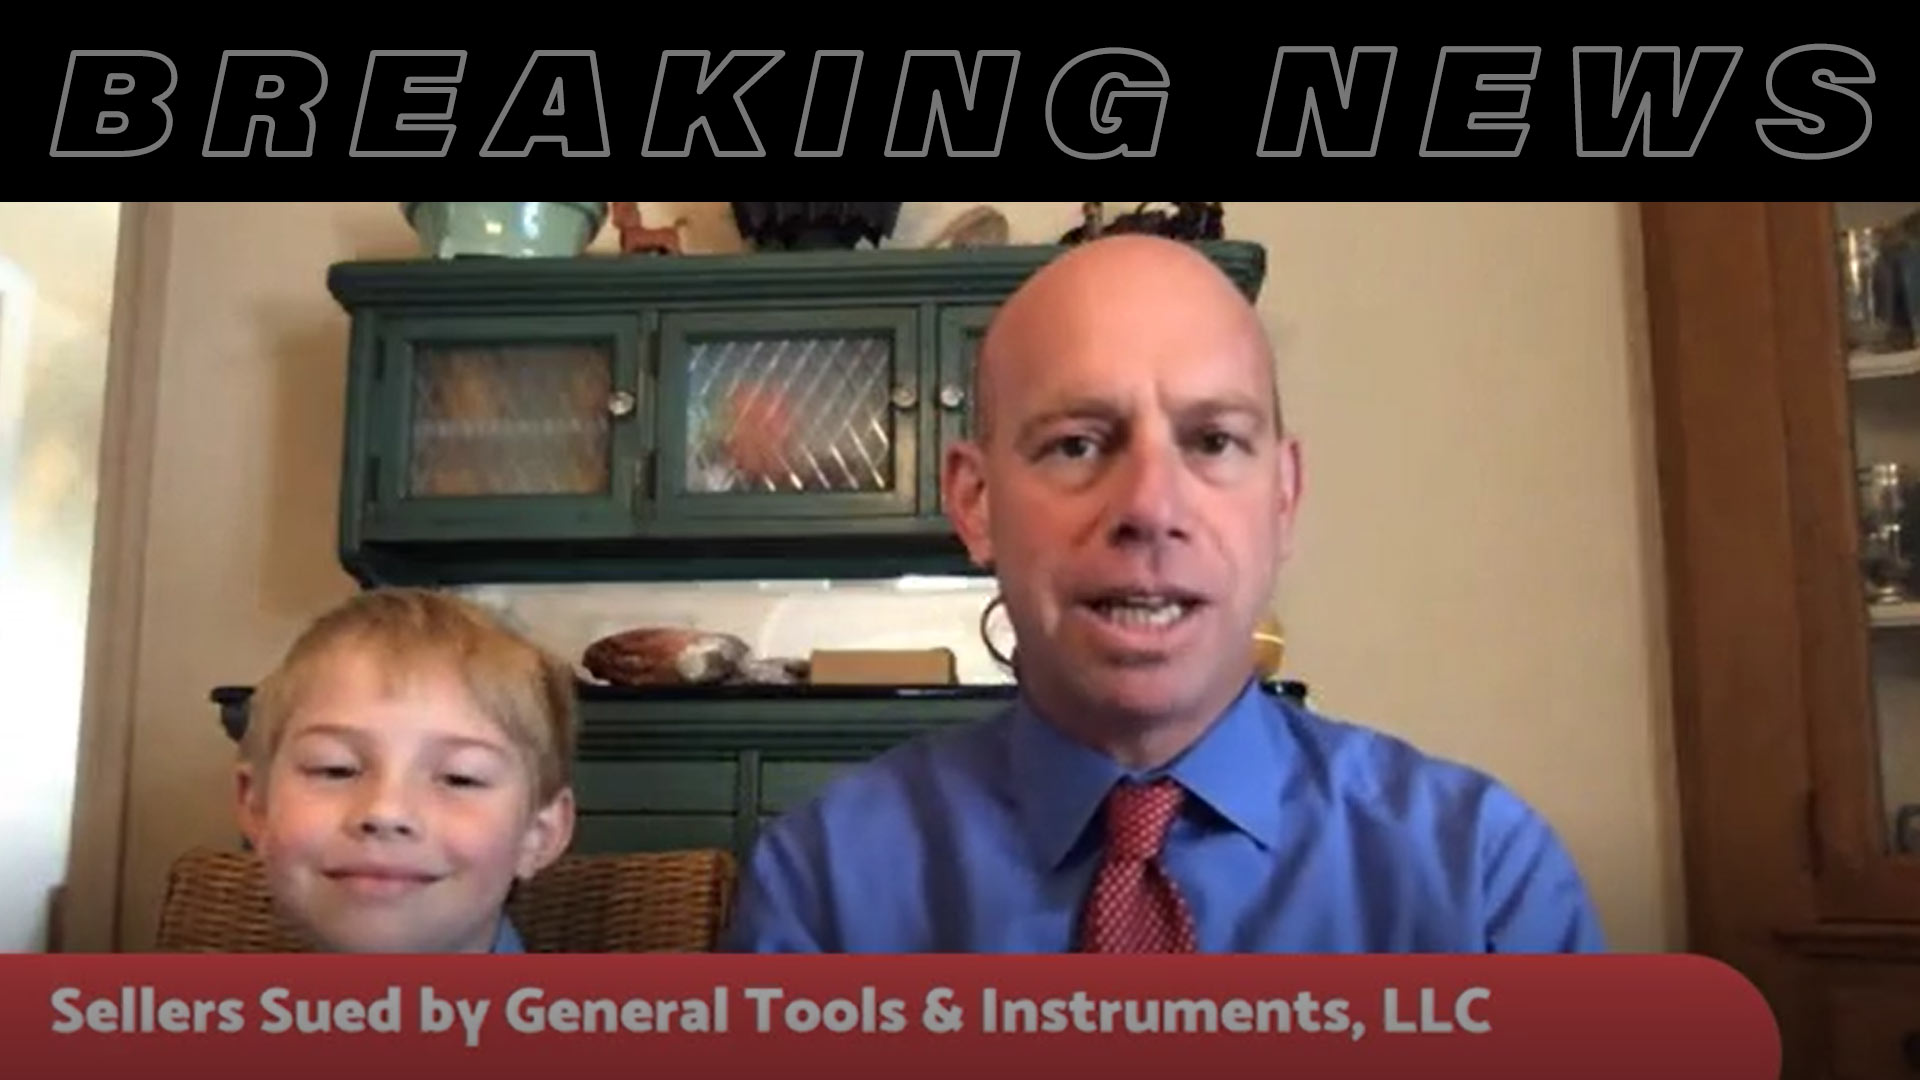 Sellers sued by General Tools & Instruments LLC